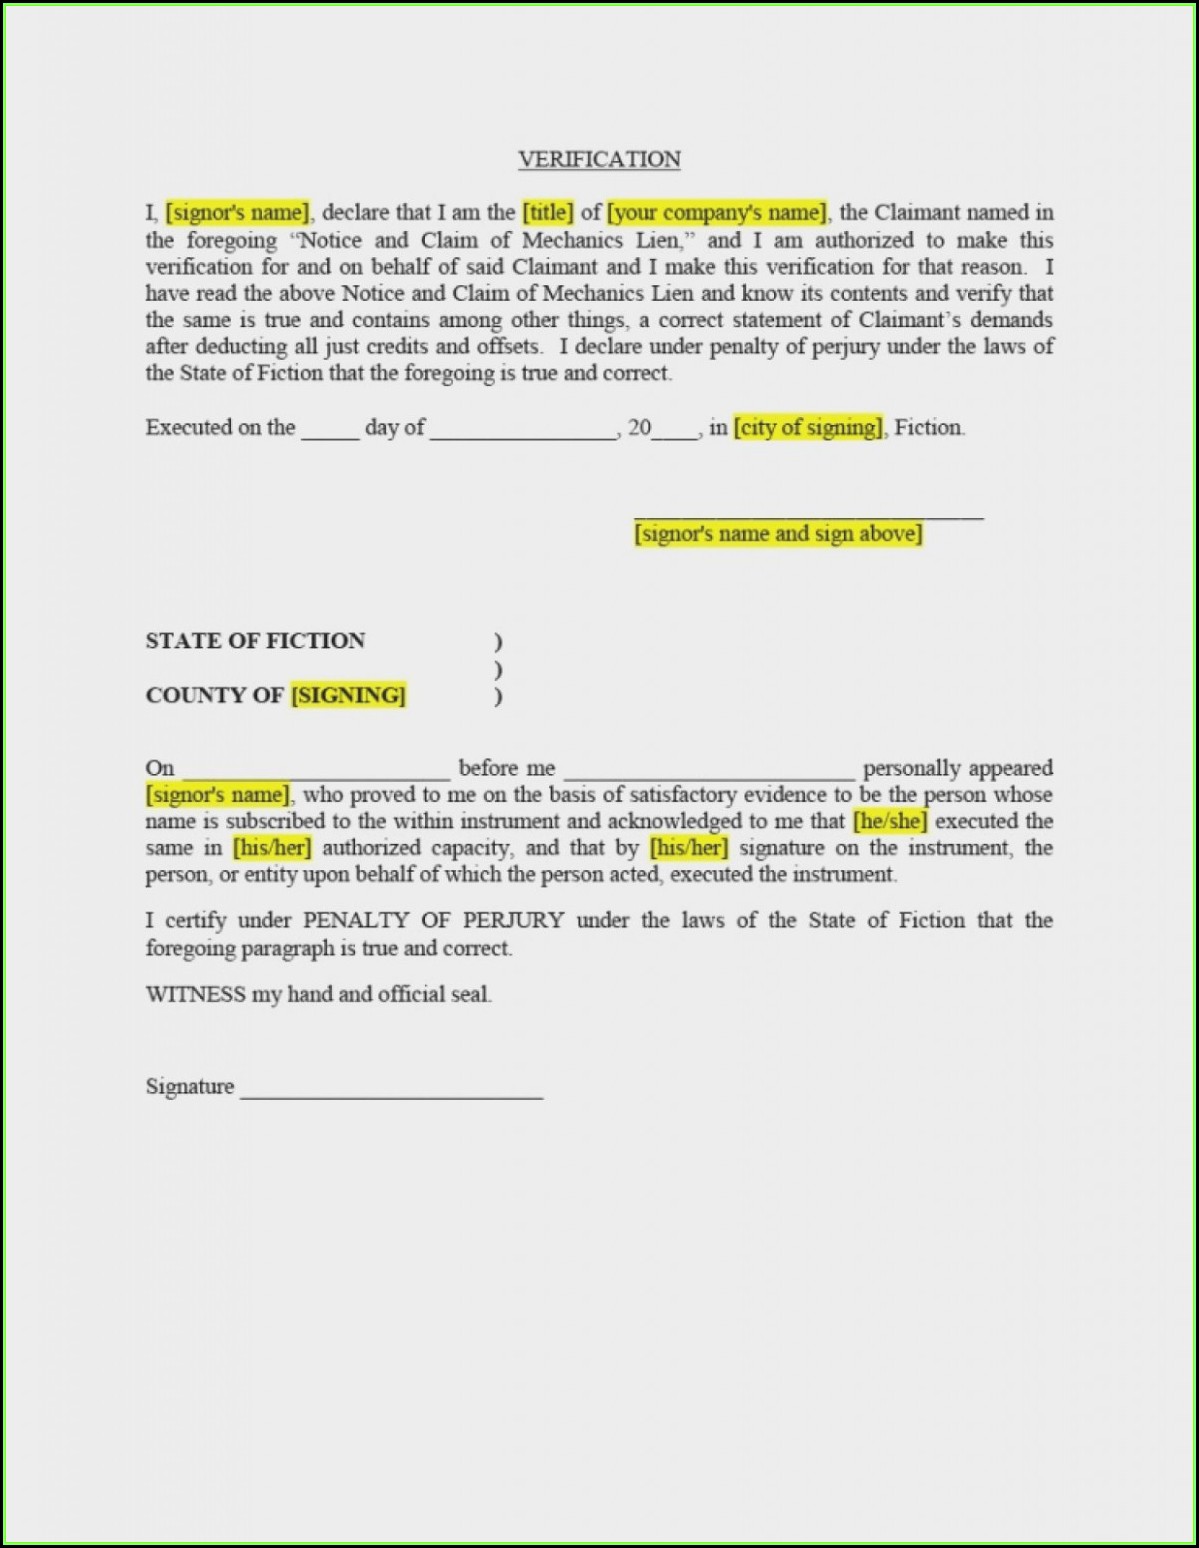 Material Lien Waiver Form Illinois